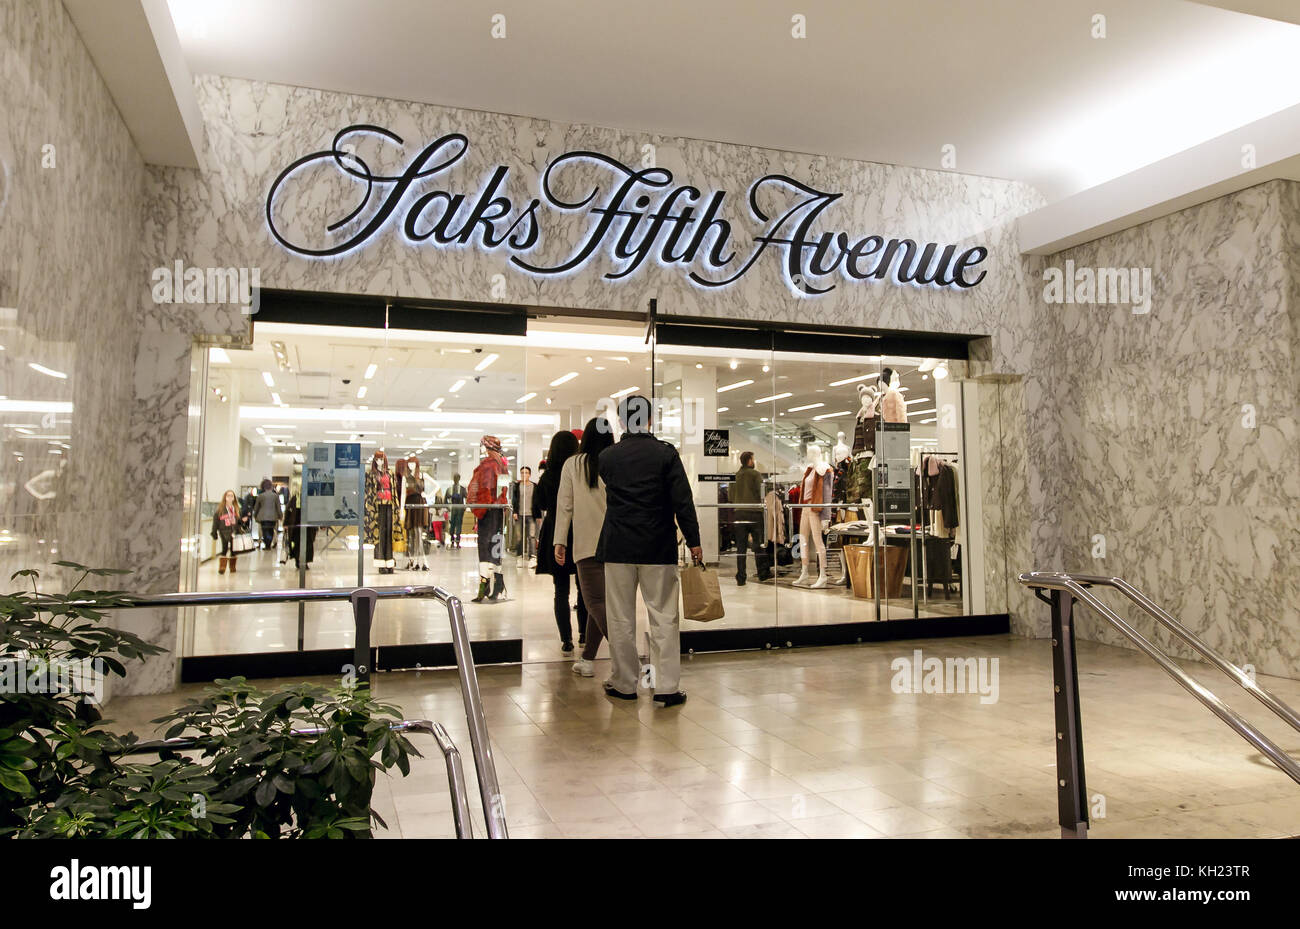 Saks Fifth Avenue Store Somerset Mall Stock Photo 1937454199